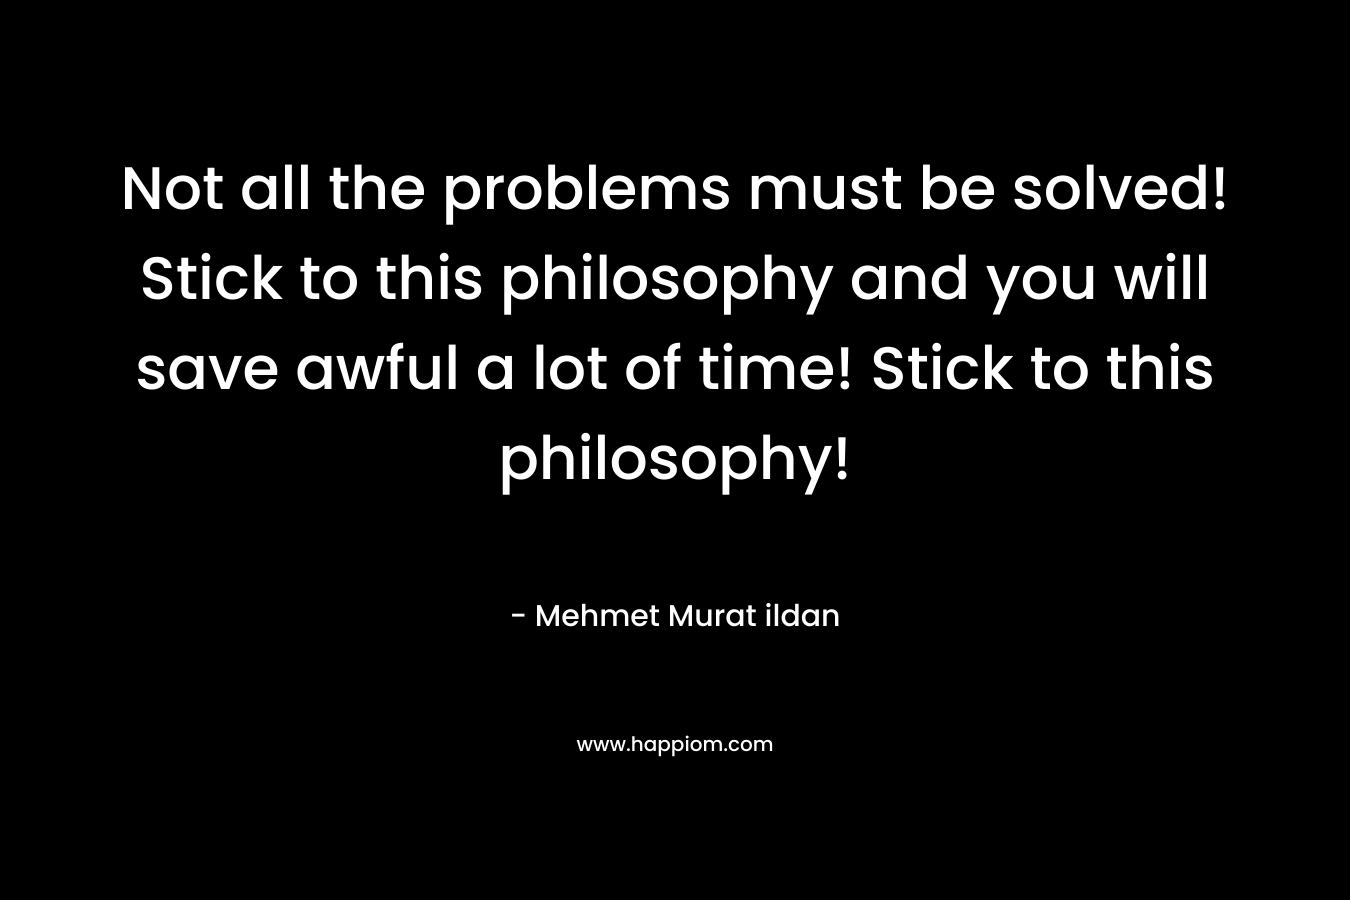 Not all the problems must be solved! Stick to this philosophy and you will save awful a lot of time! Stick to this philosophy!